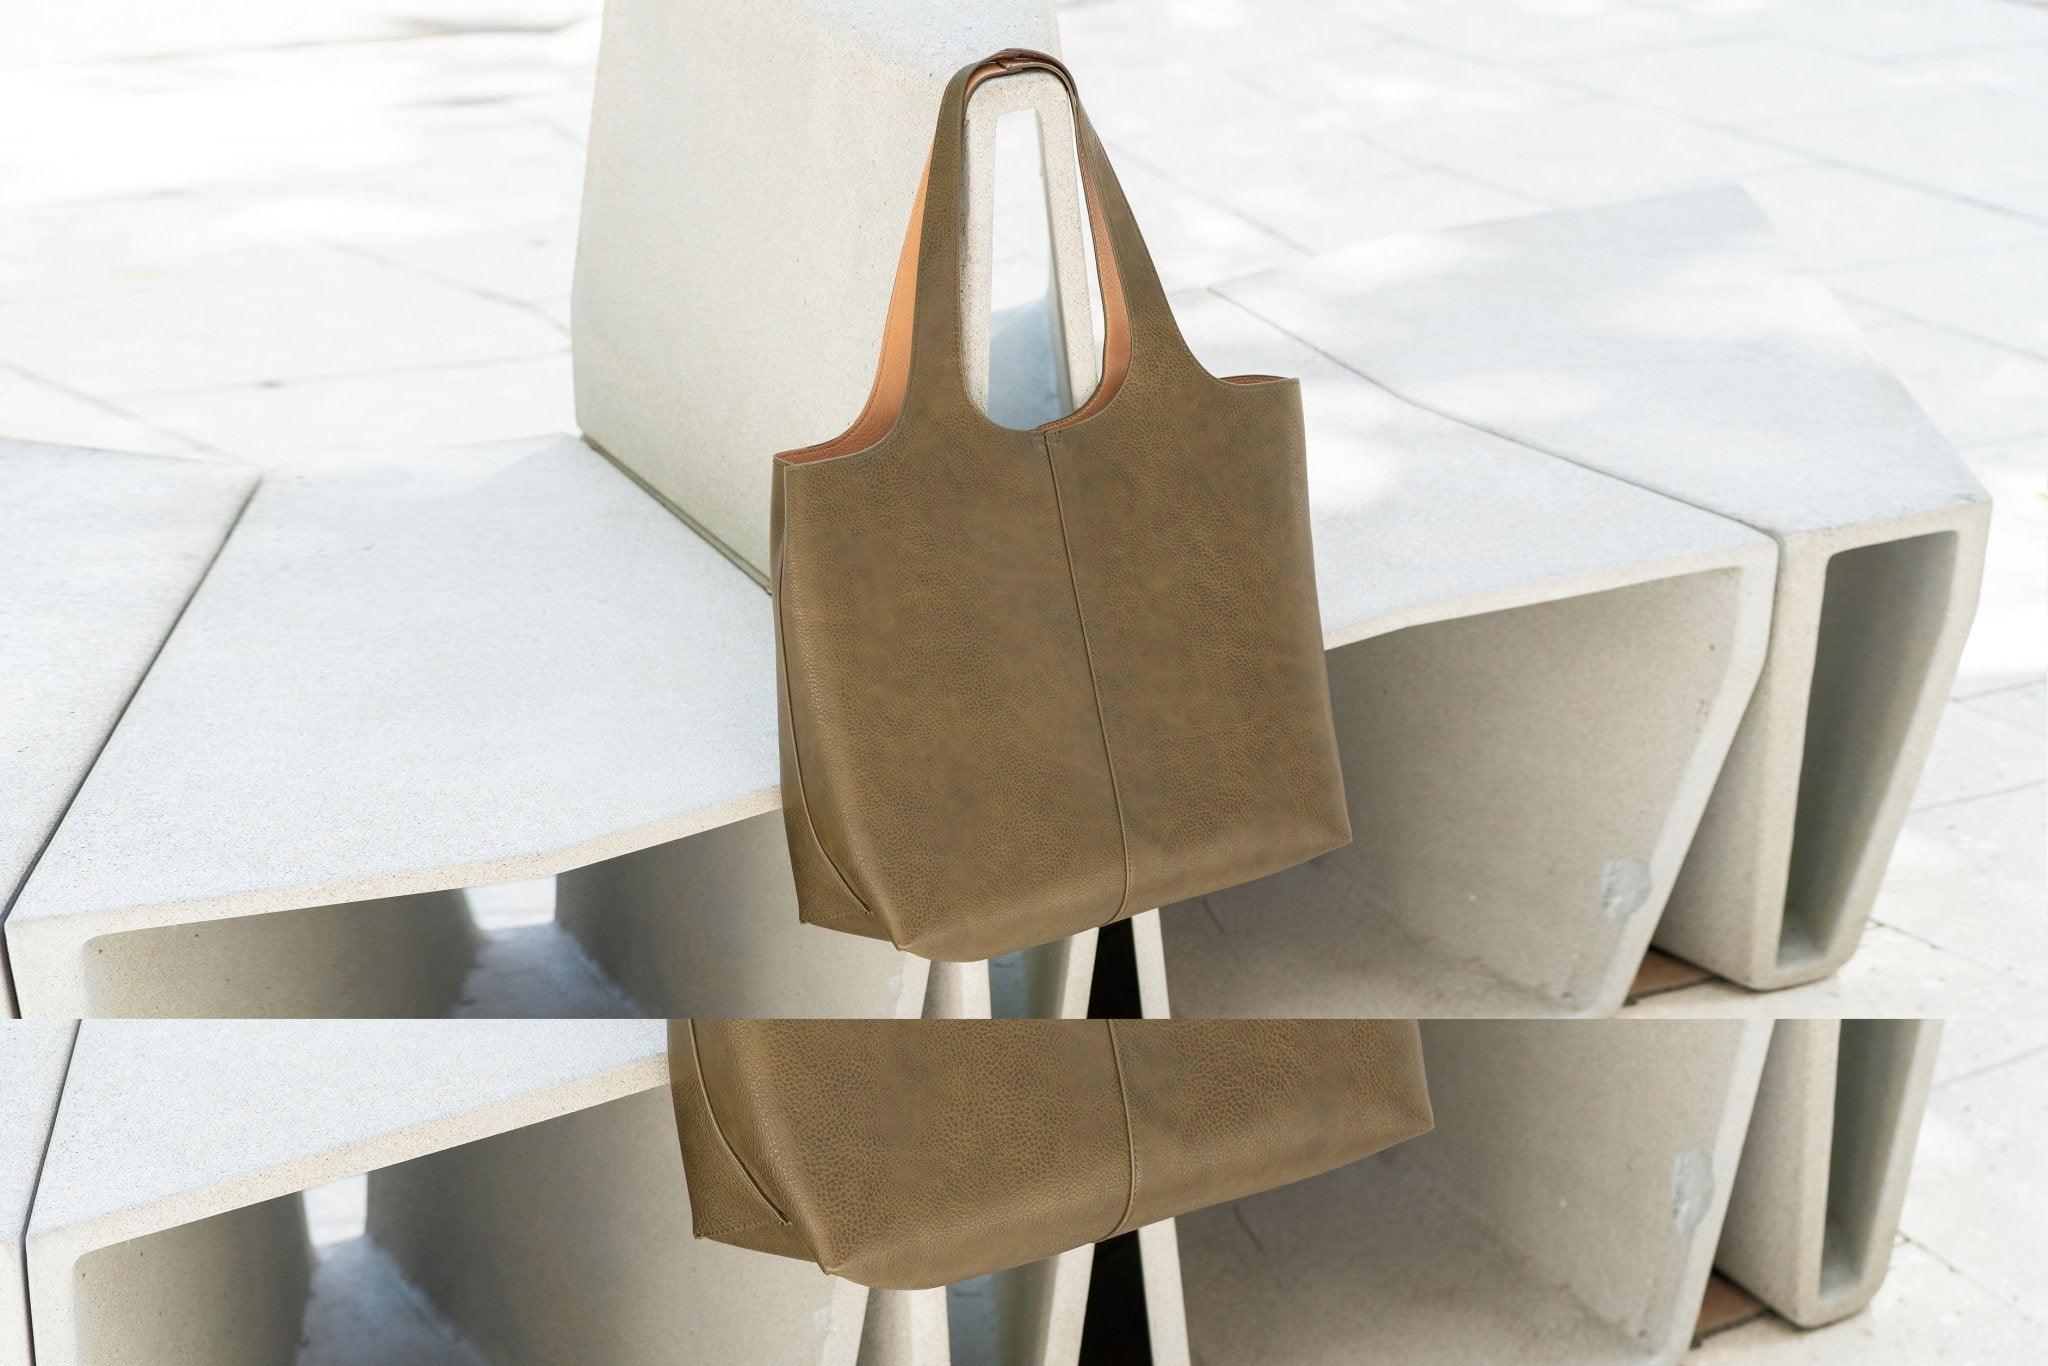 Discover our innovative vegan leather Campa Tumbler Tote Bag – SOMEFANCYNAME